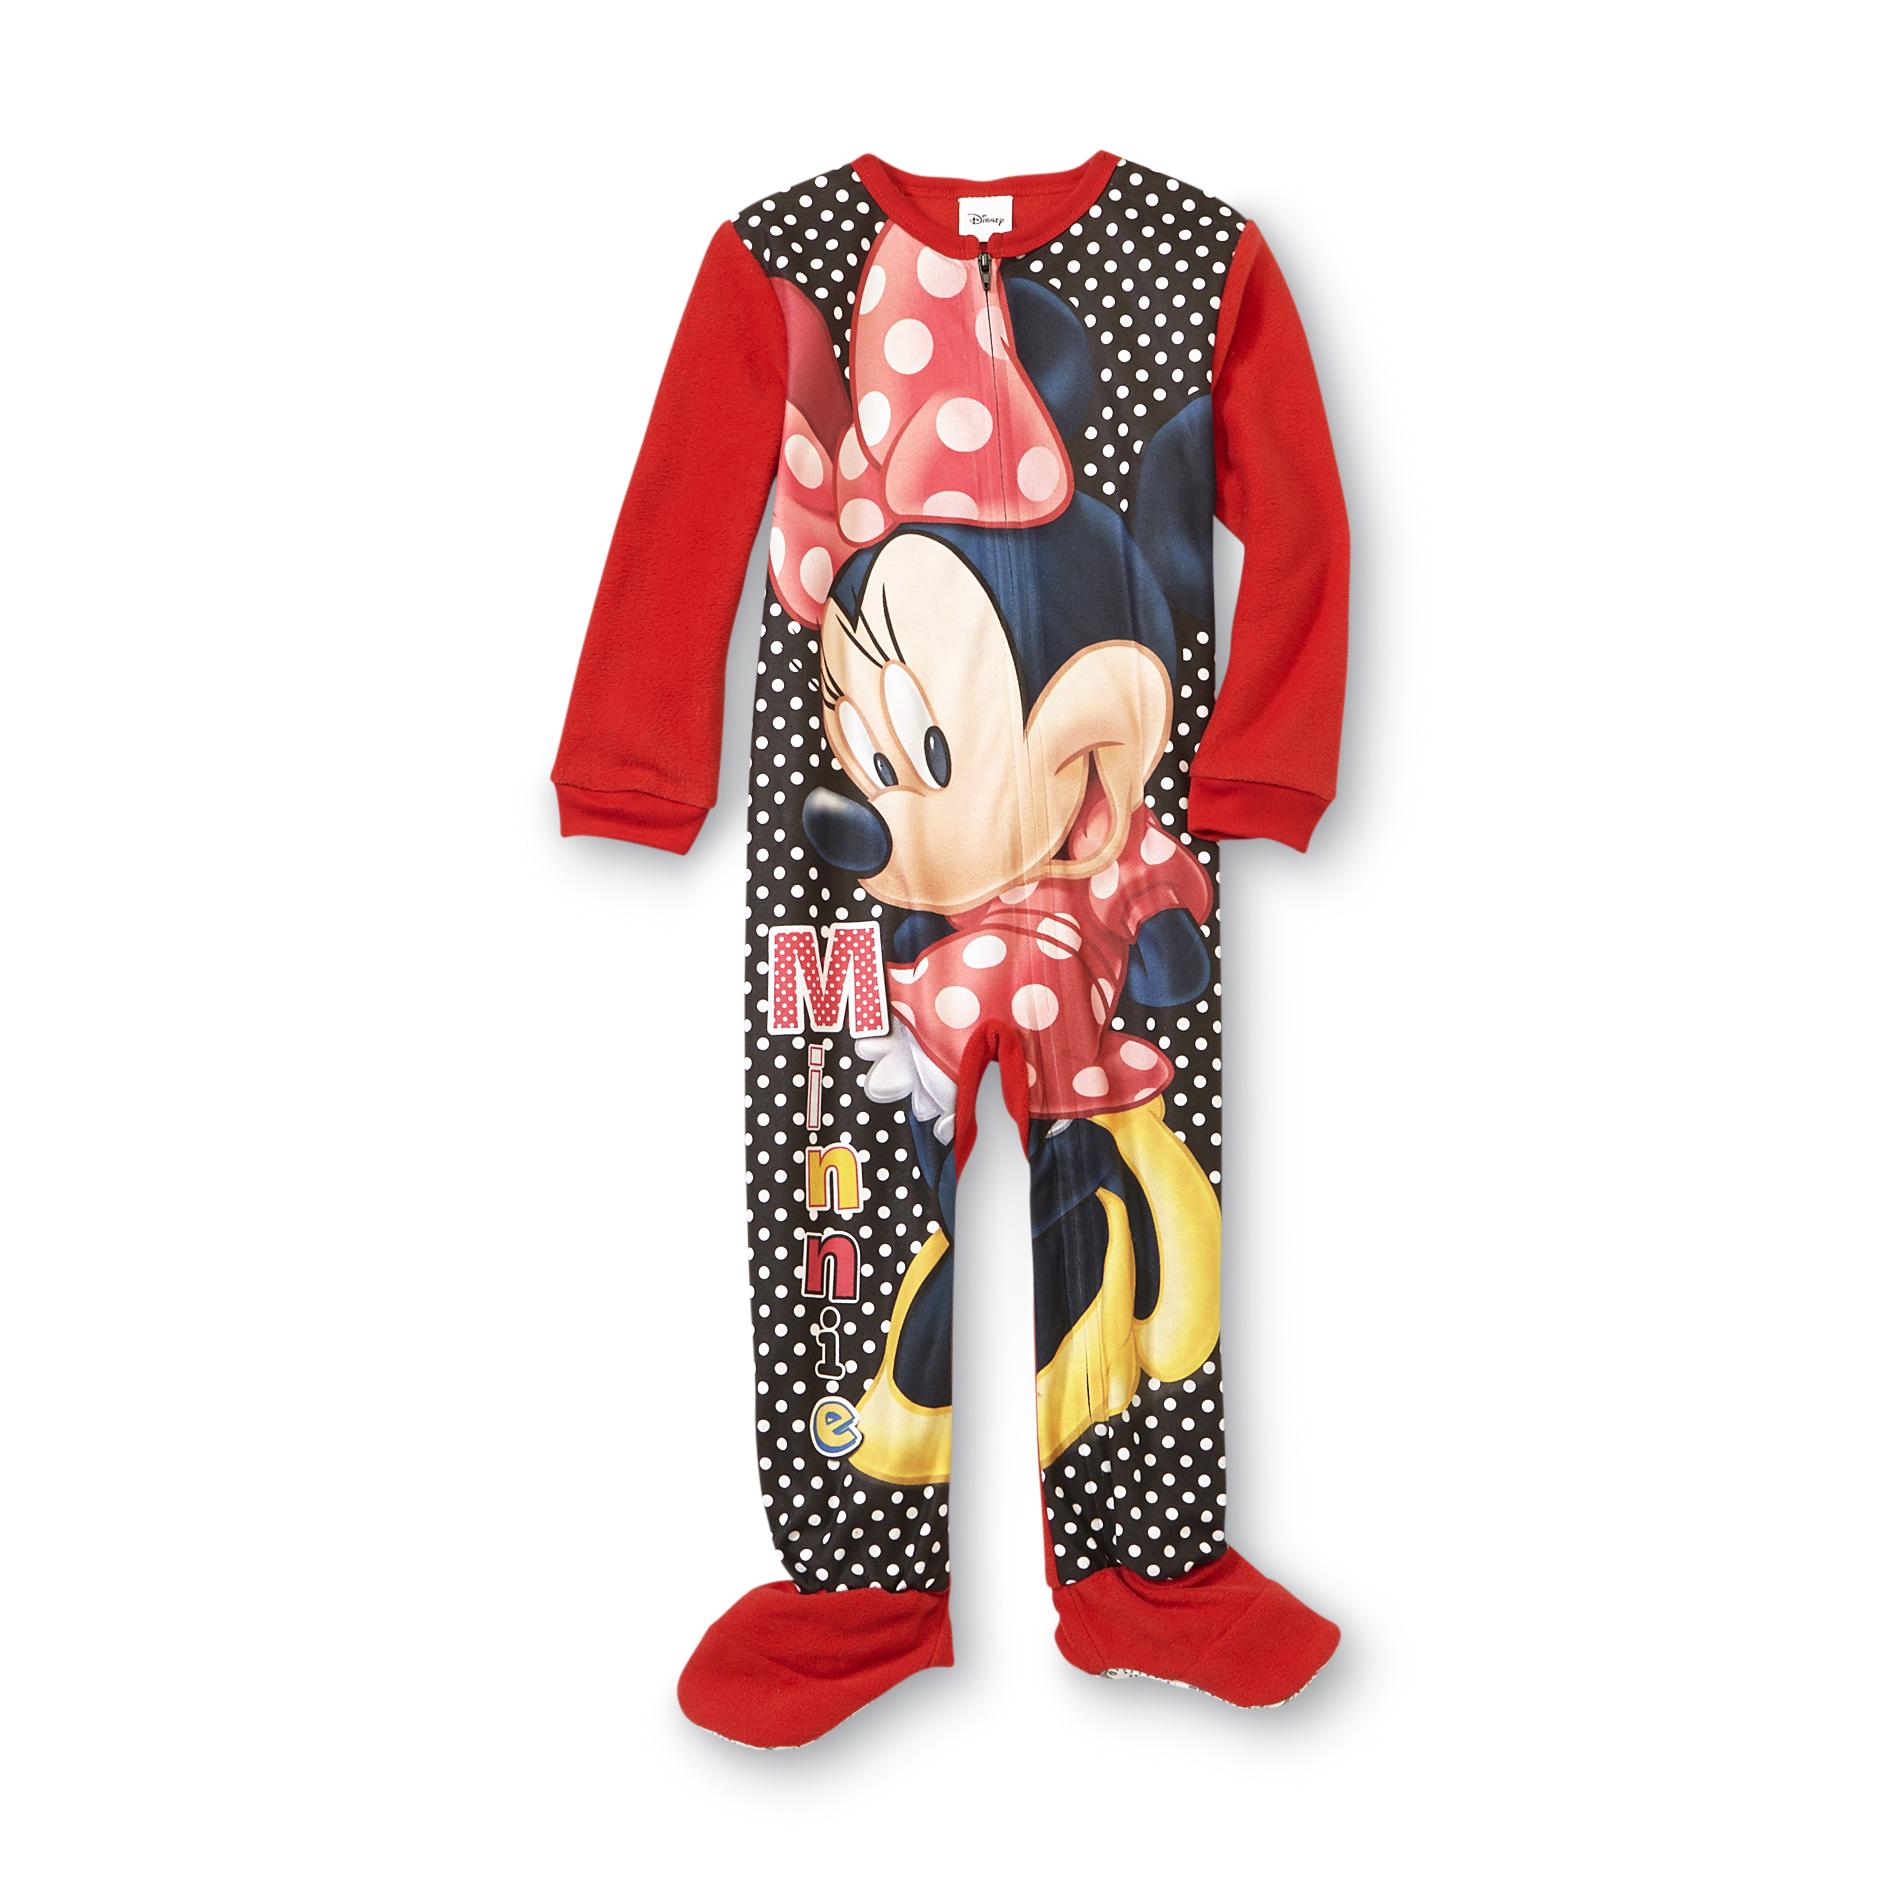 Disney Minnie Mouse Infant & Toddler Girl's Fleece Footed Pajamas